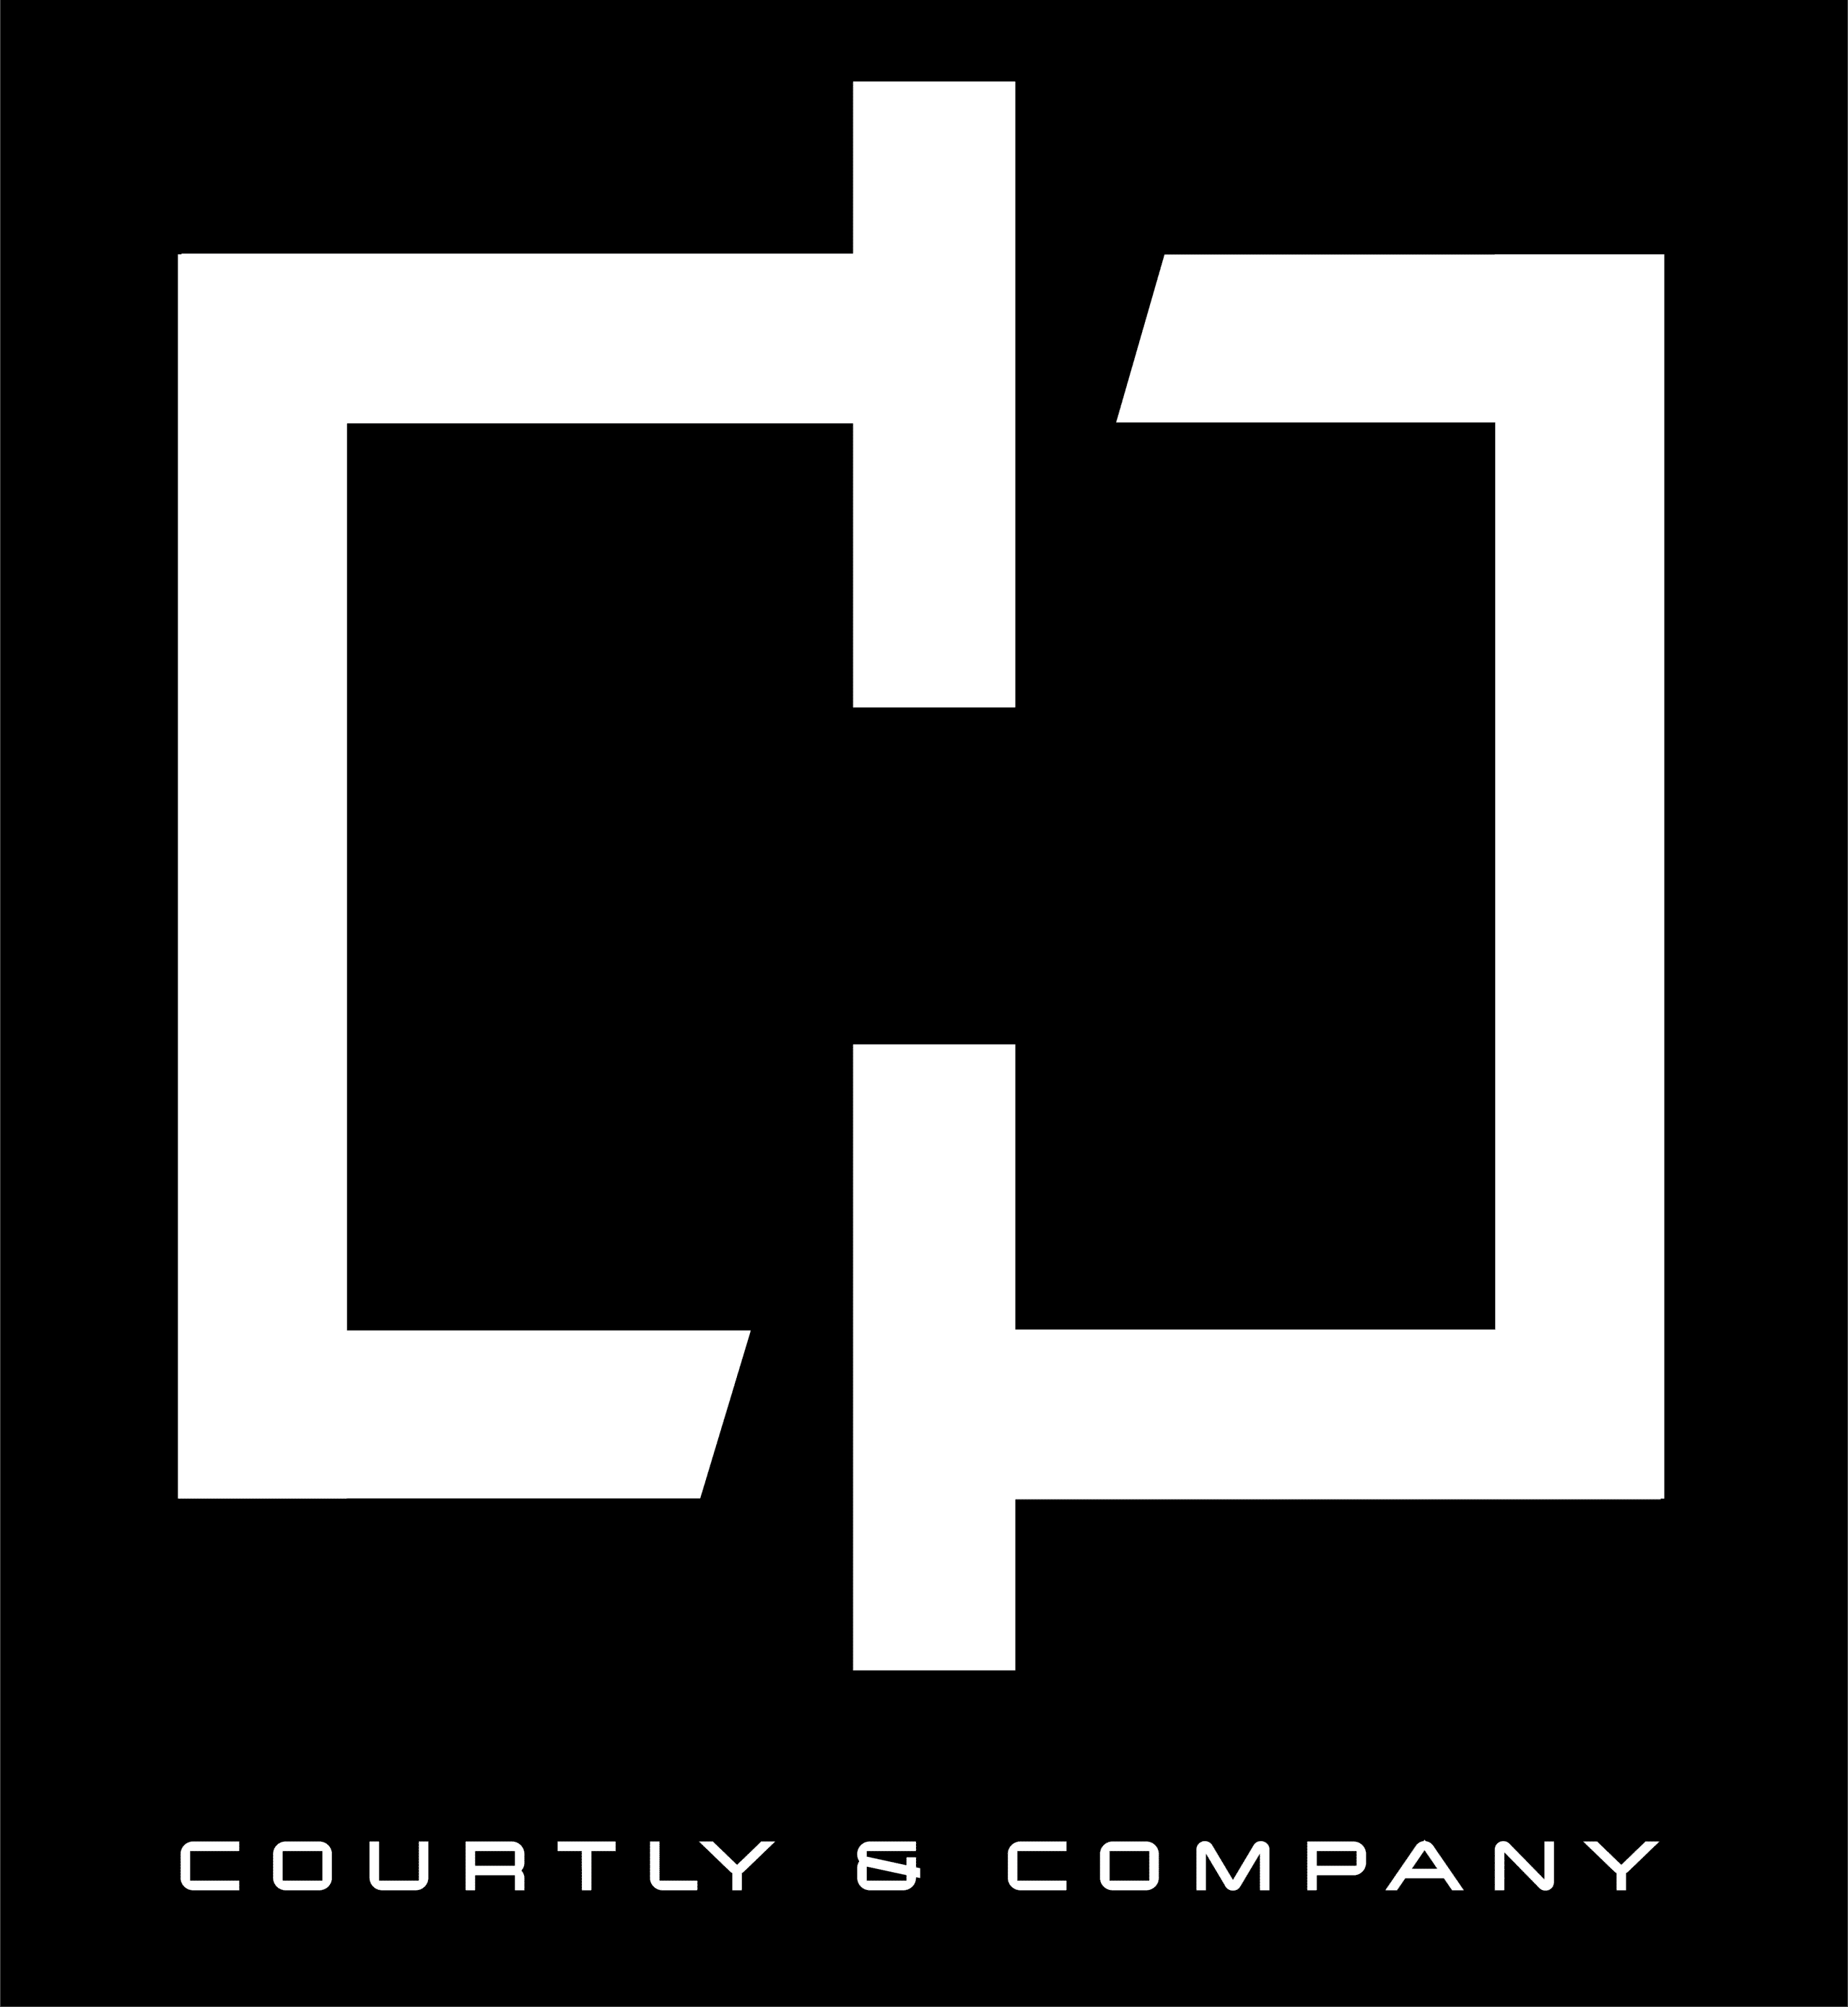 Courtly & Co.